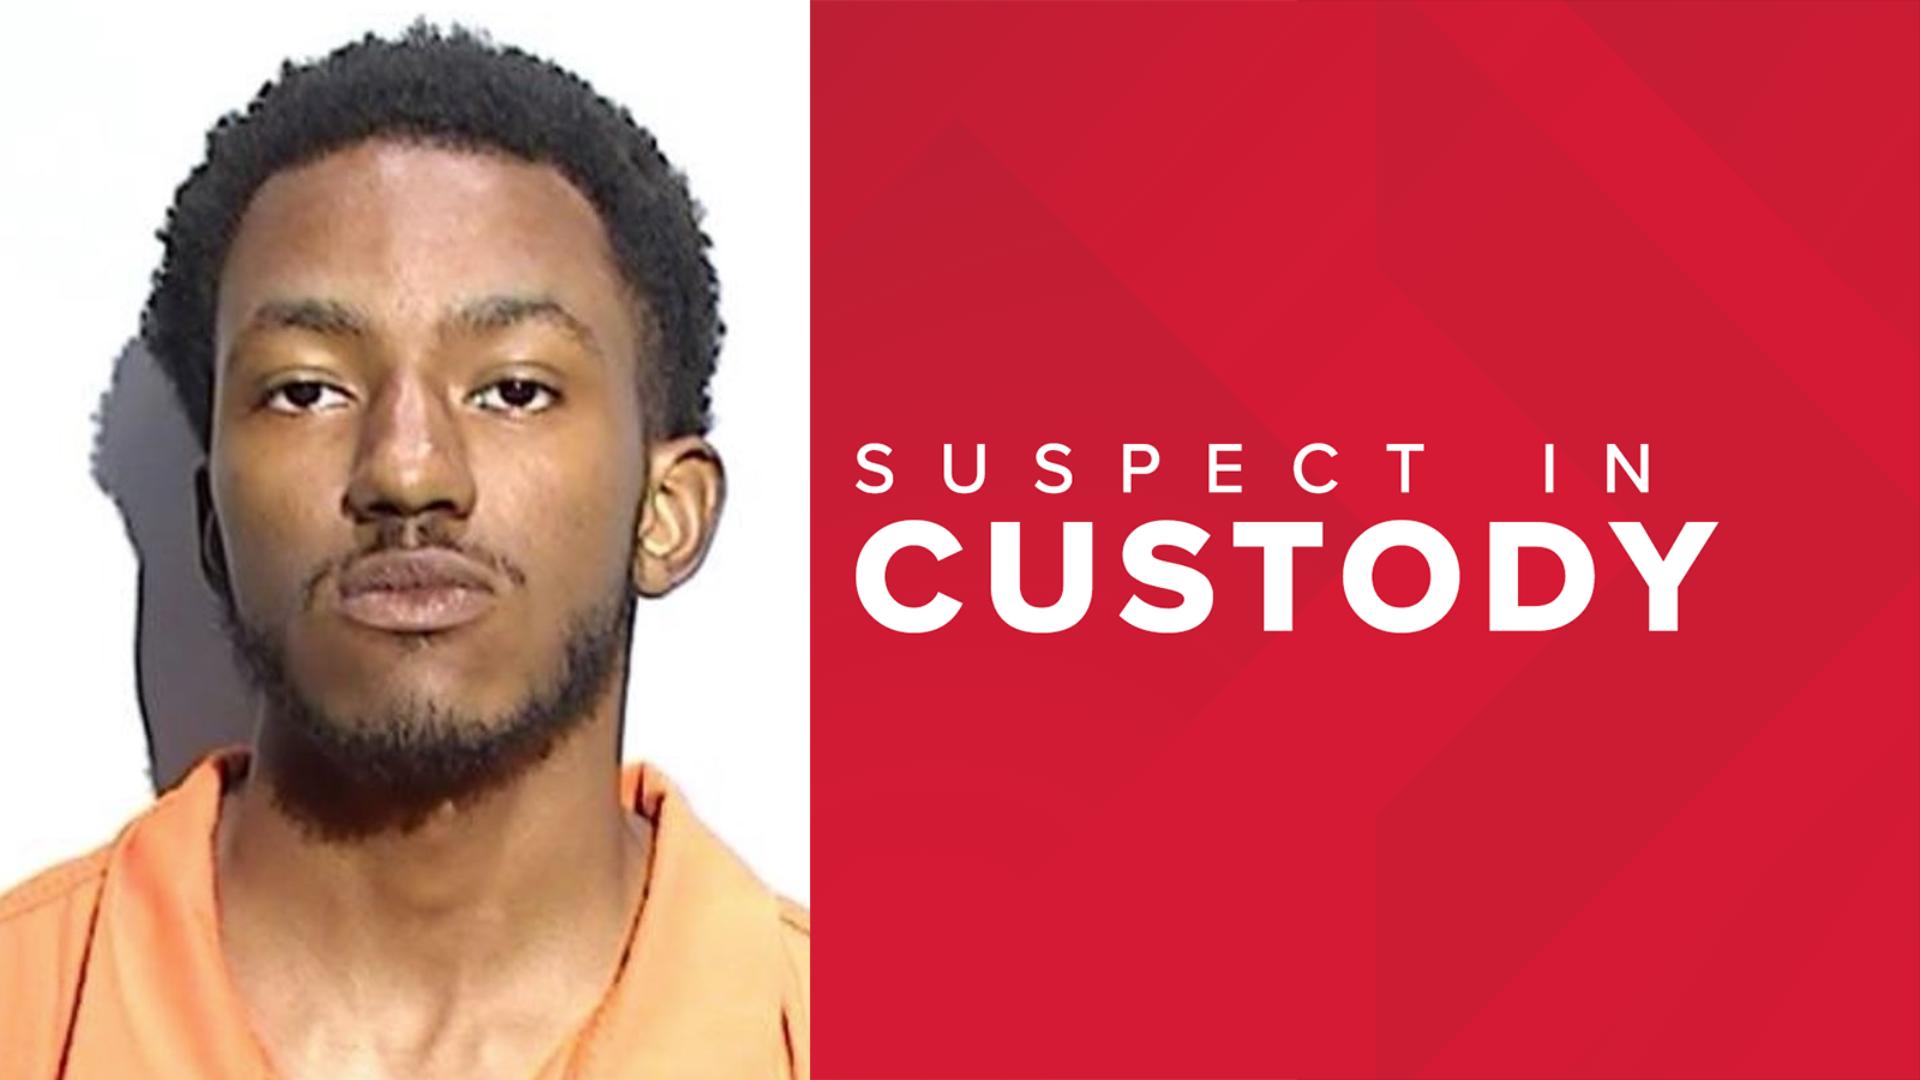 Markas Walker, 21, was arrested Thursday and charged with murder and felonious assault following a May 31 shooting on Beecham St. that killed Marshawn Robinson, 17.